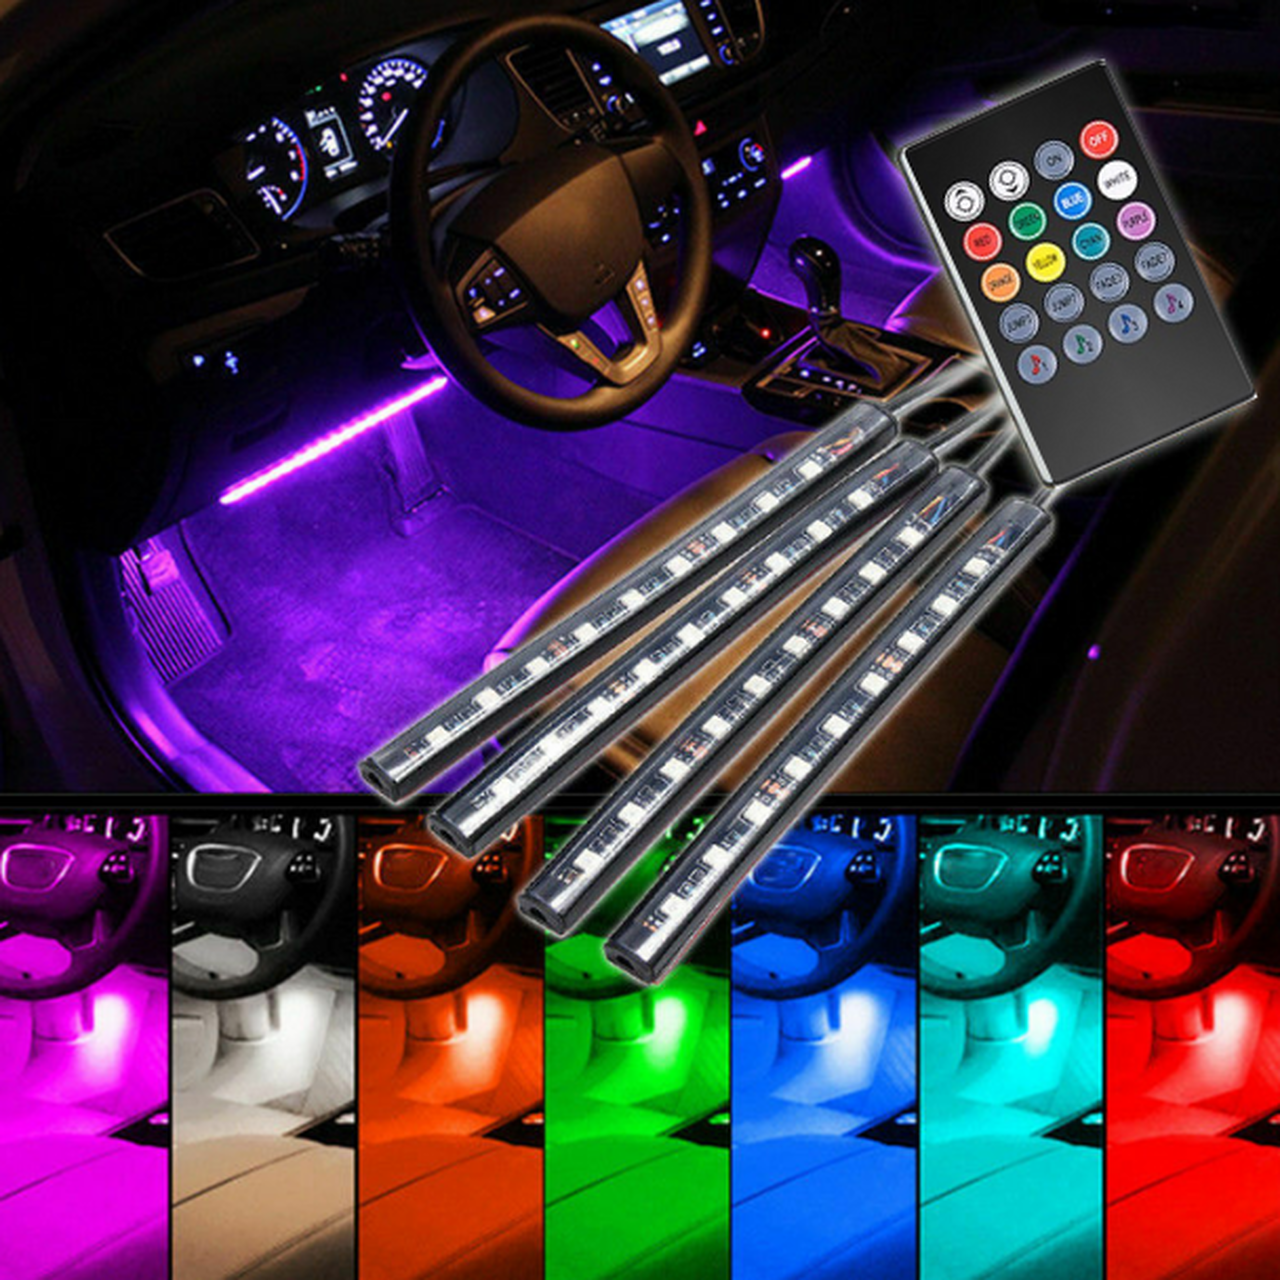 Atmosphere Car Led Strip Lights Kit, Music Interactive With Remote Control